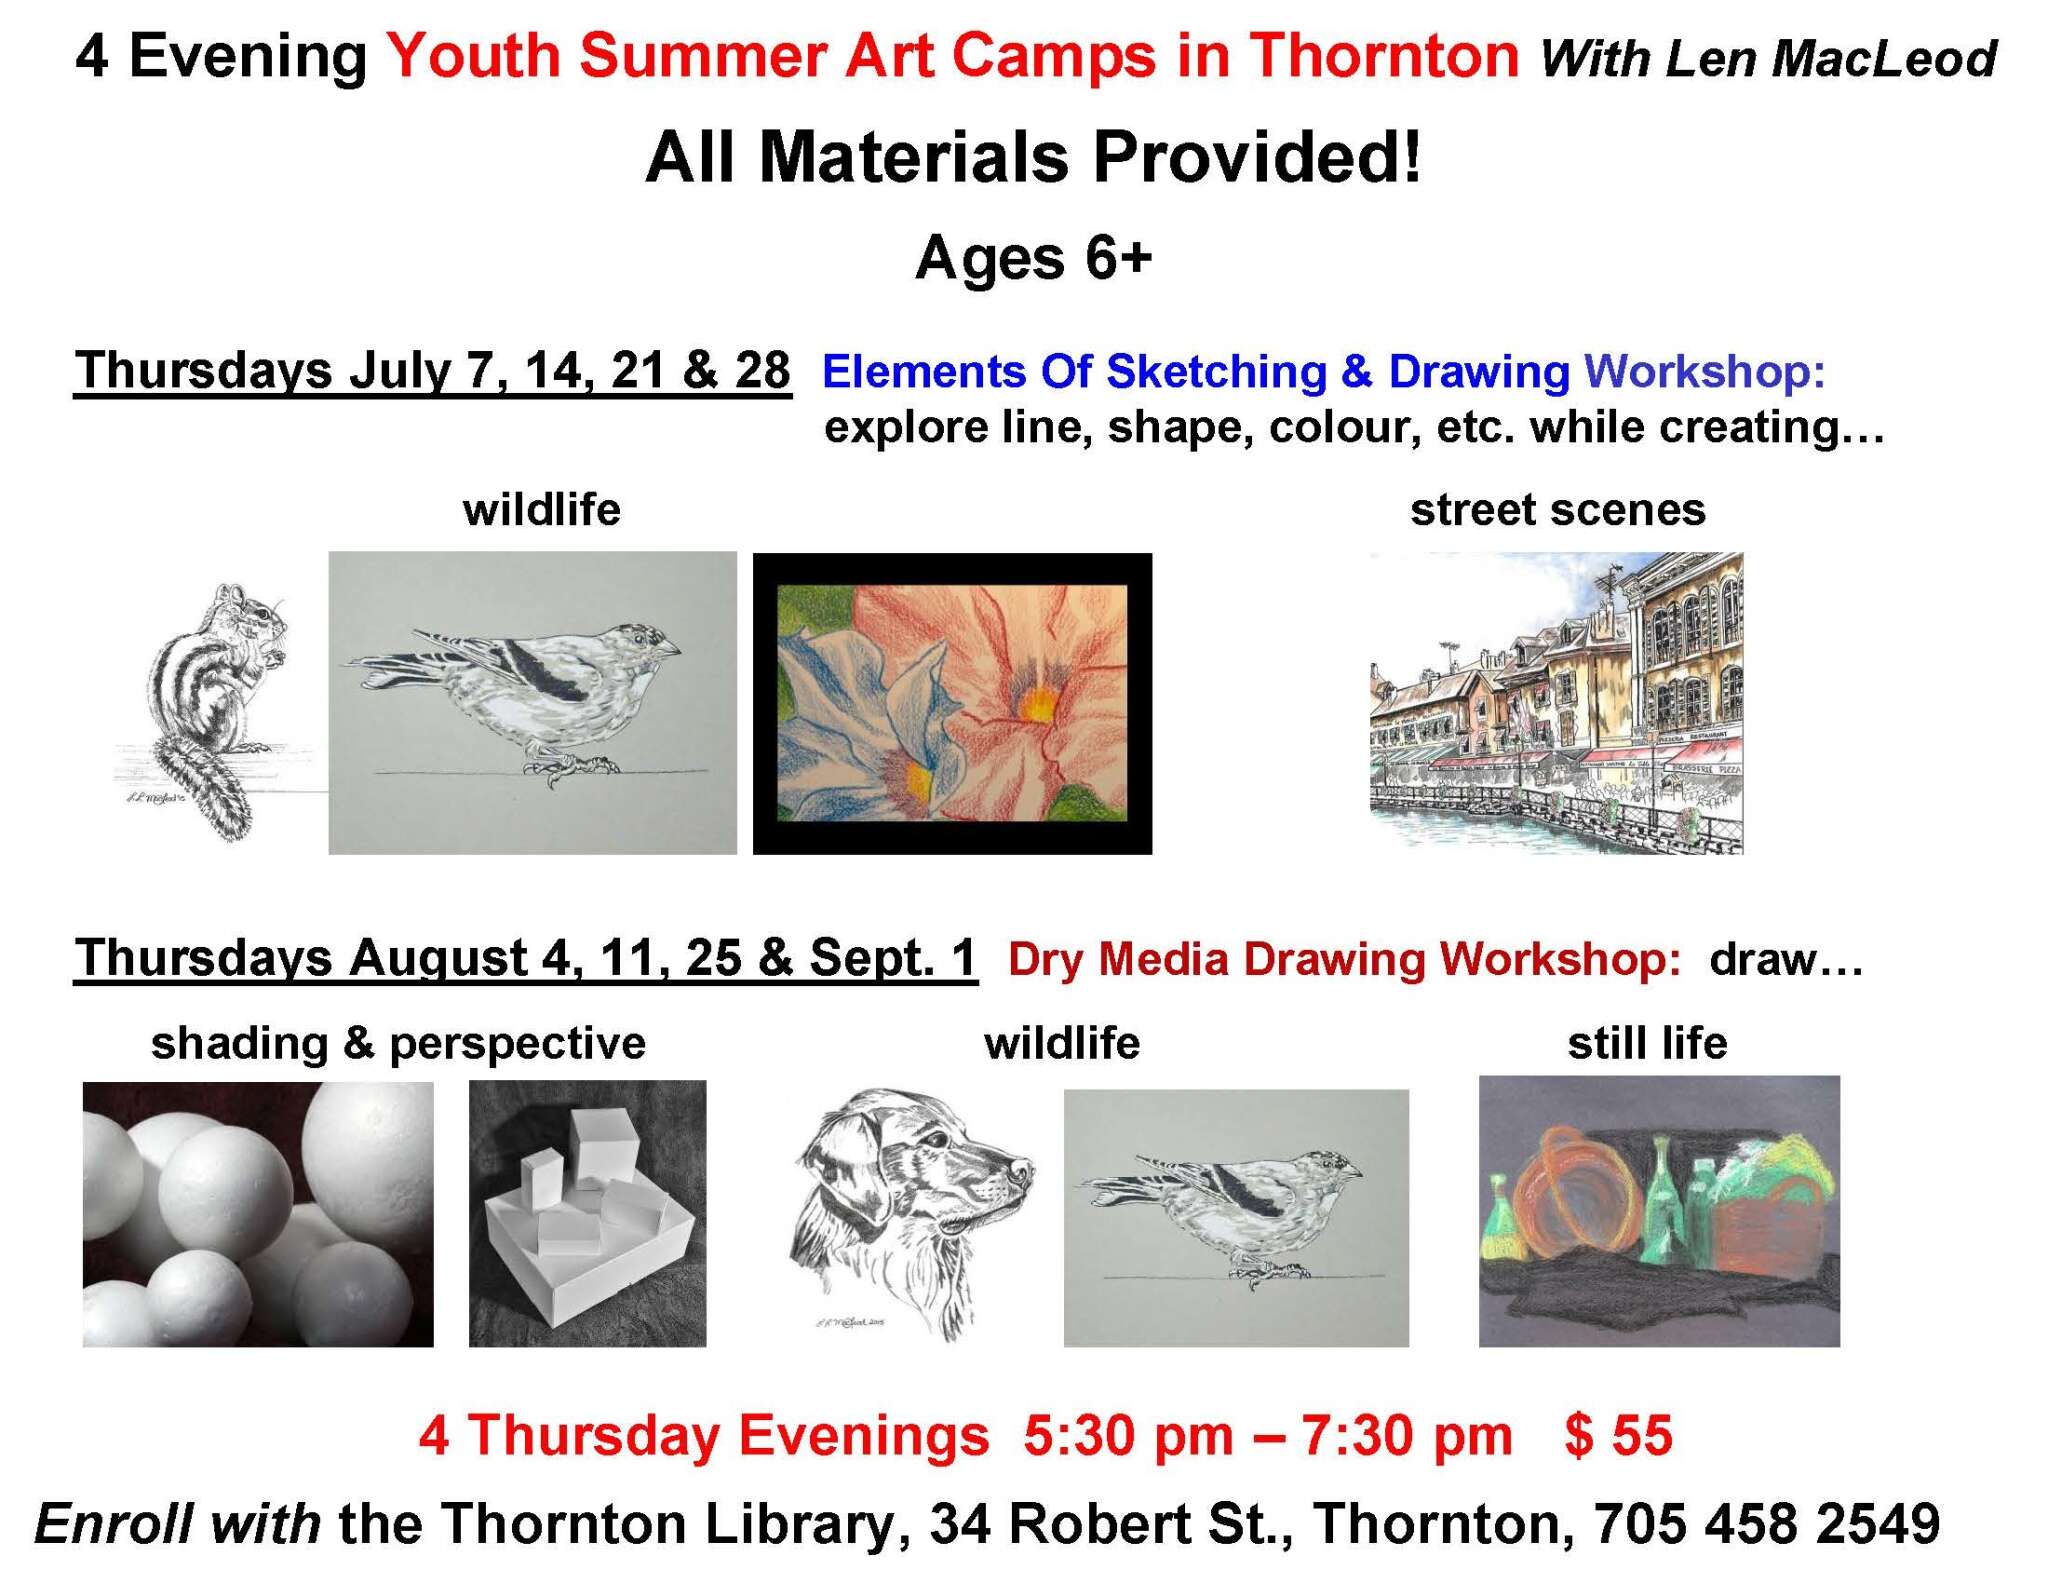 Summer Art Camps with Len MacLeod - 4 Evening Youth Summer Art Camps in Thornton